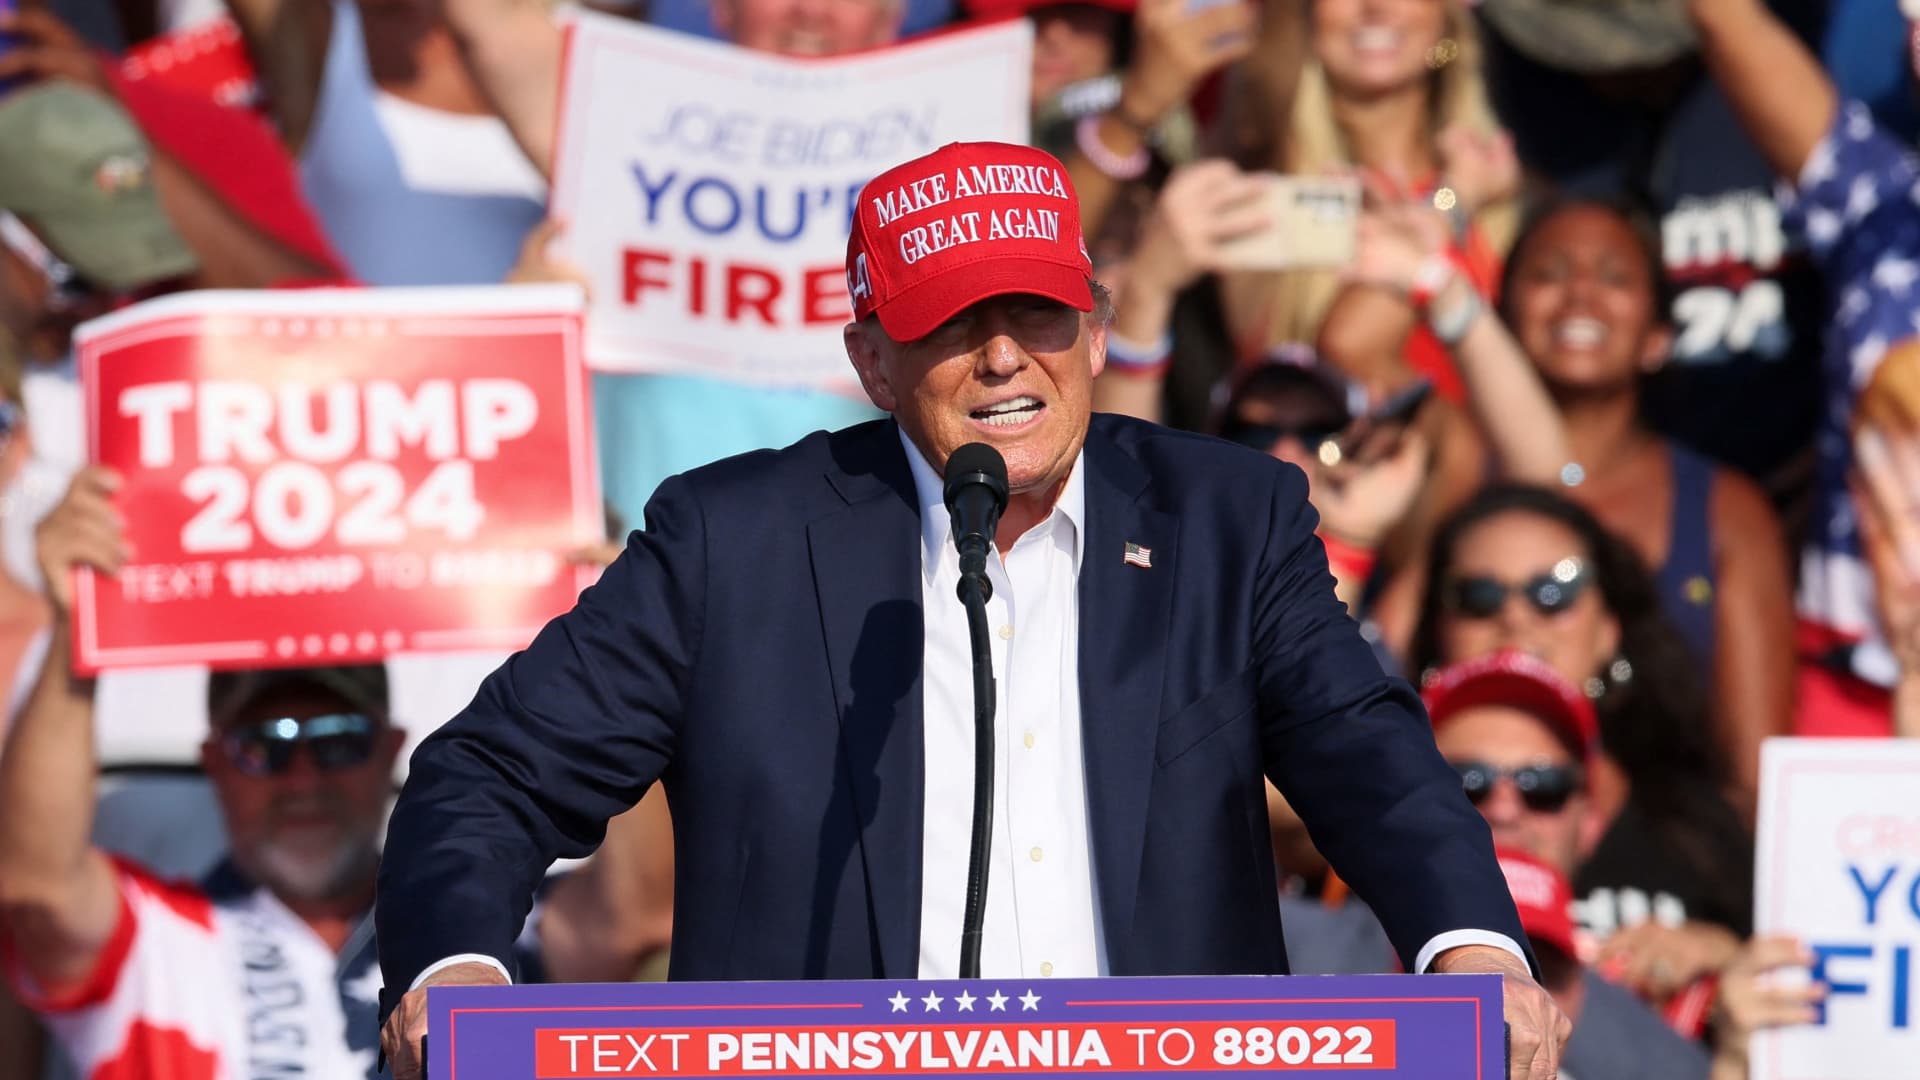 Trump holds rally in Butler, Pennsylvania, where he survived assassination attempt